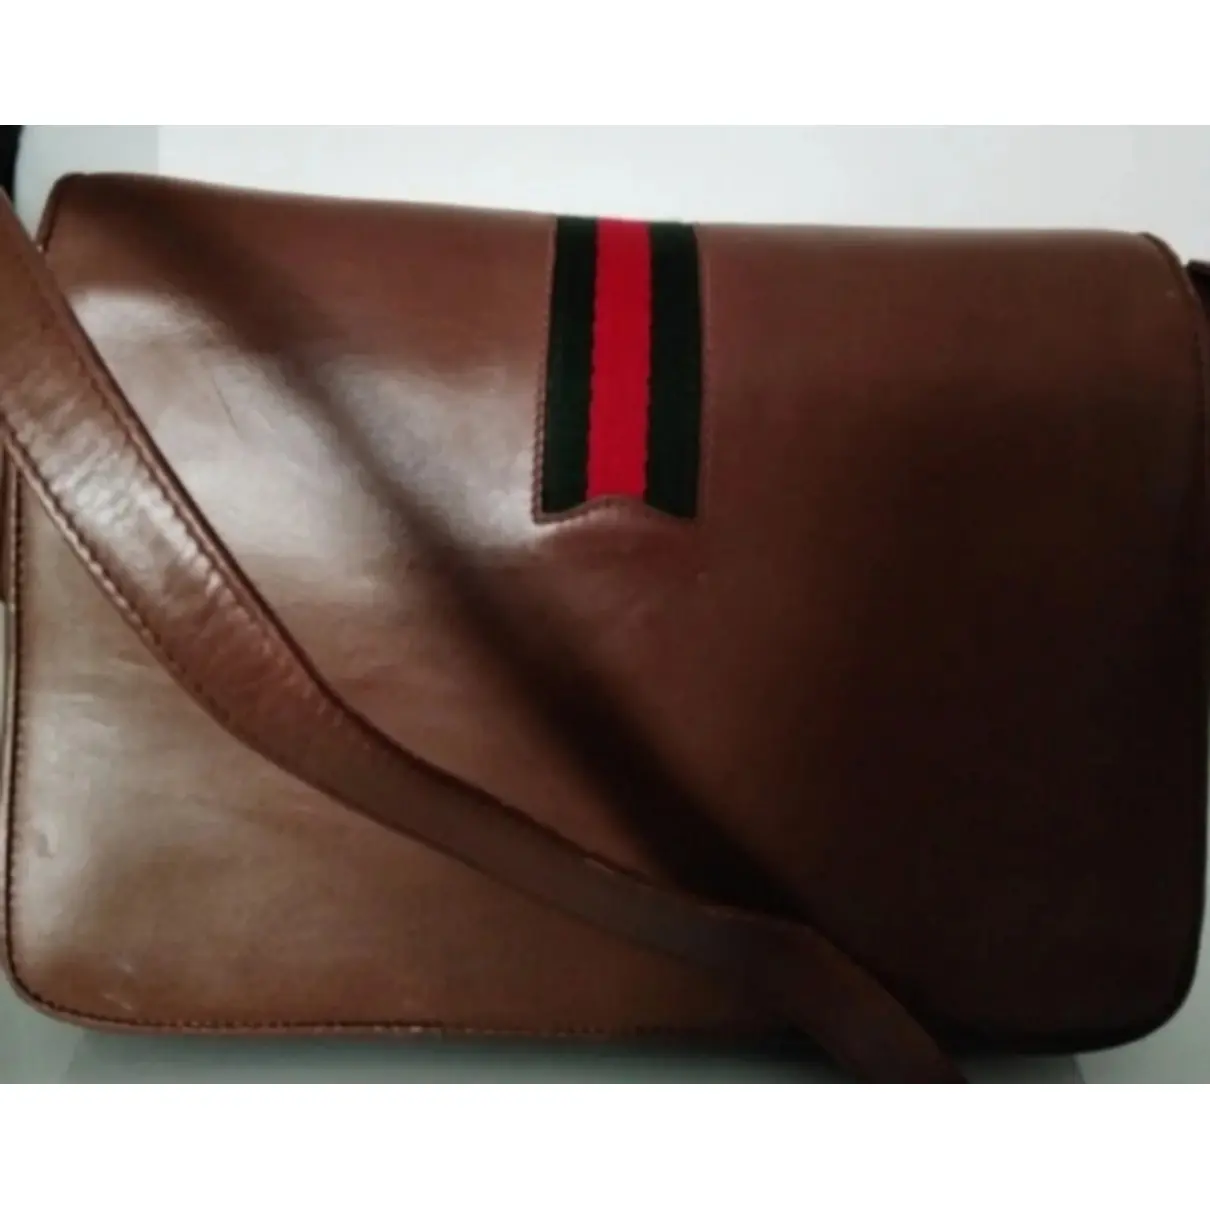 Buy Gucci Ophidia Compartment Messenger leather crossbody bag online